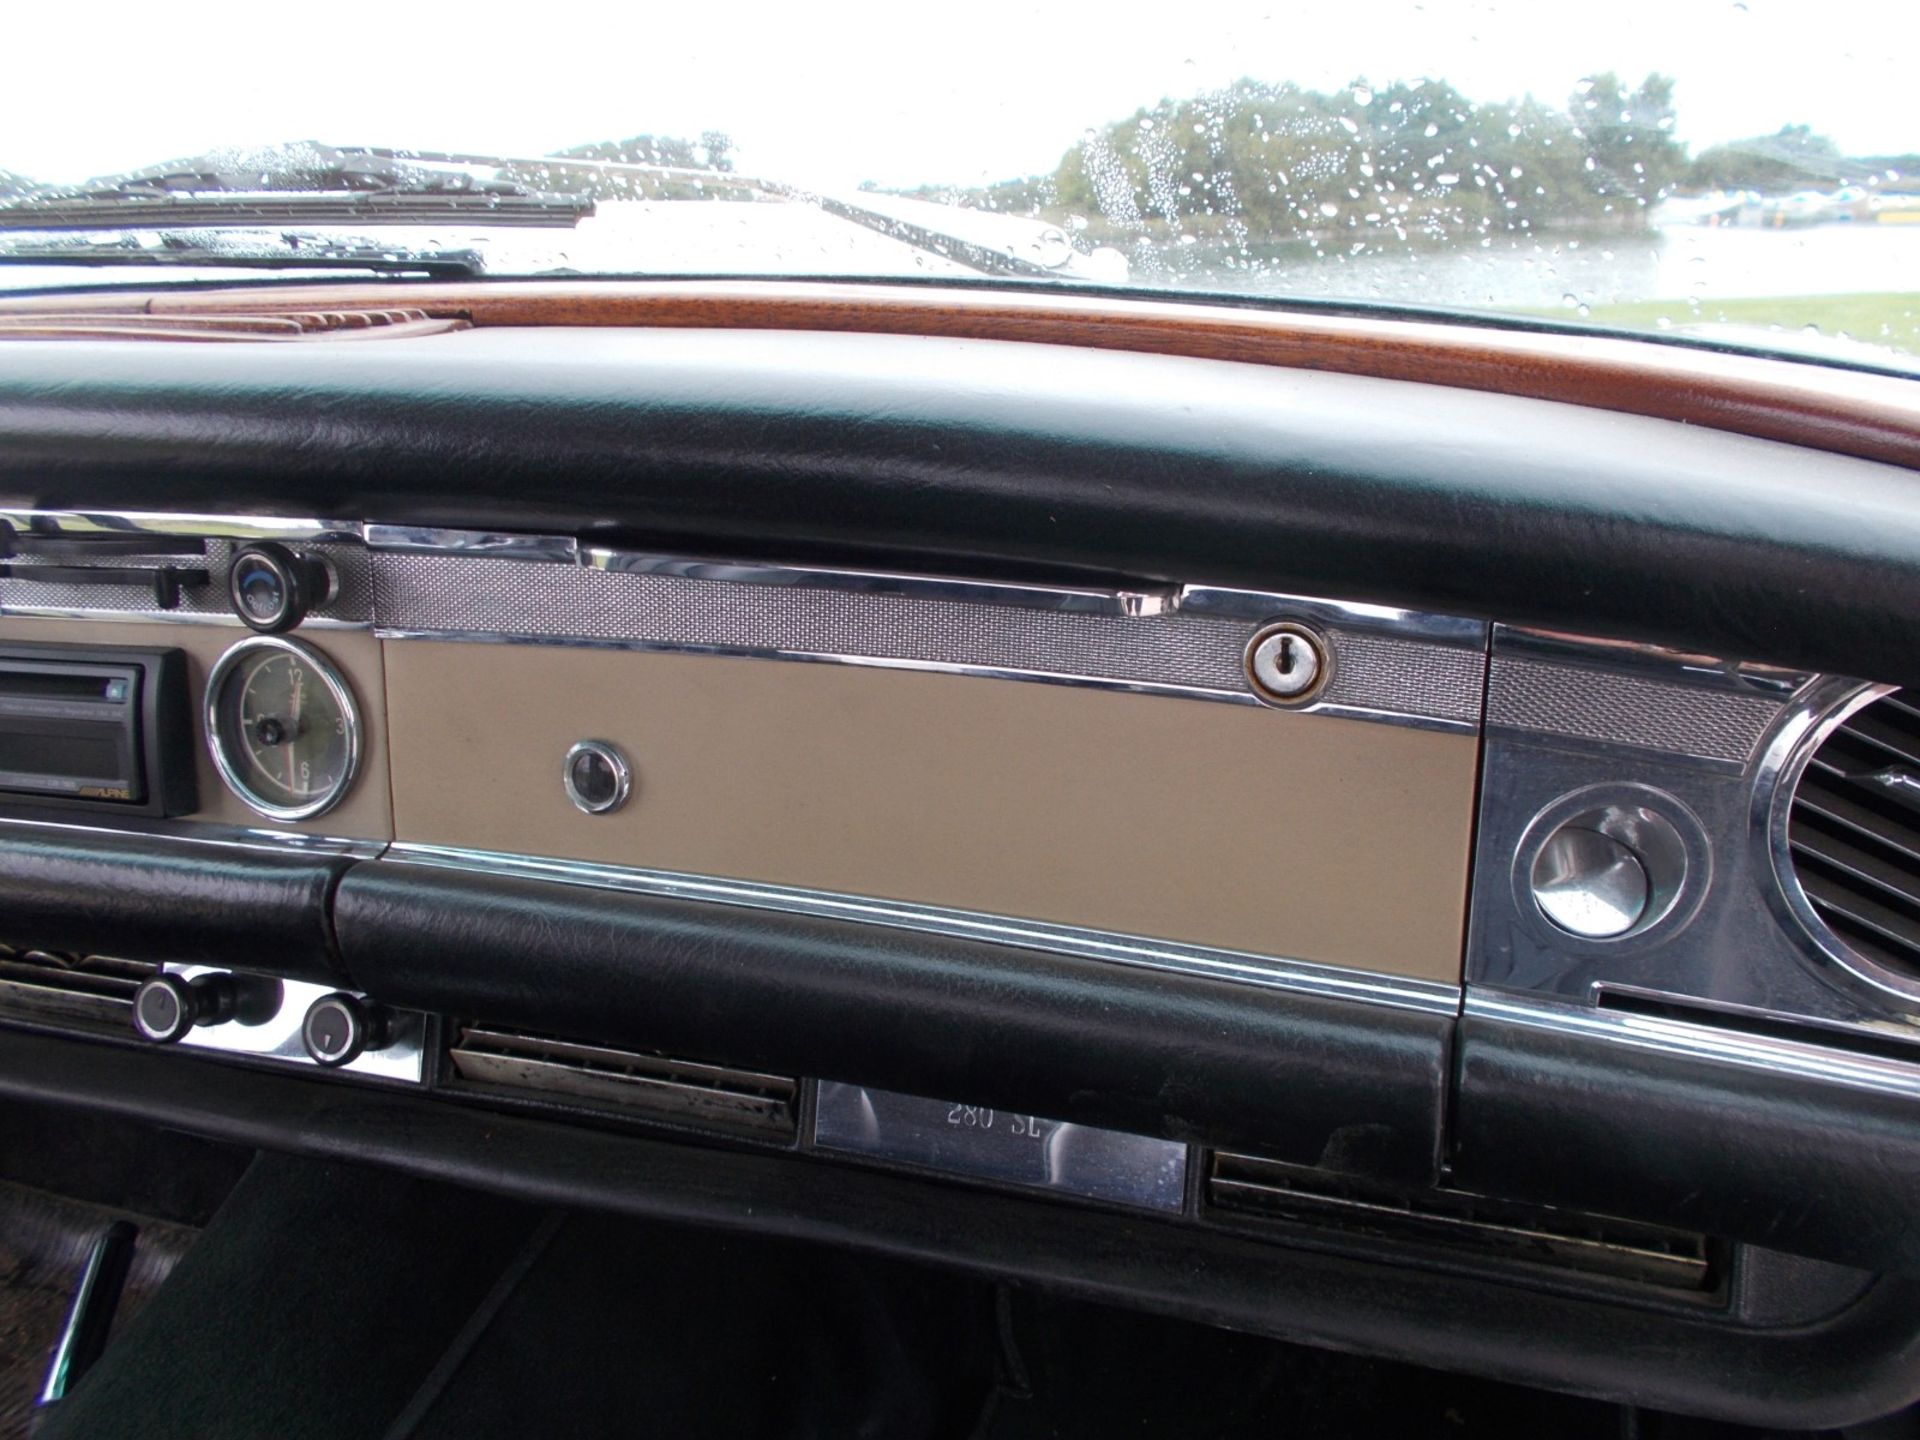 1969 MERCEDES 280SL PAGODA, AUTOMATIC, HARD/SOFT TOPS, LEFT HAND DRIVE, AMERICAN IMPORT *PLUS VAT* - Image 25 of 38